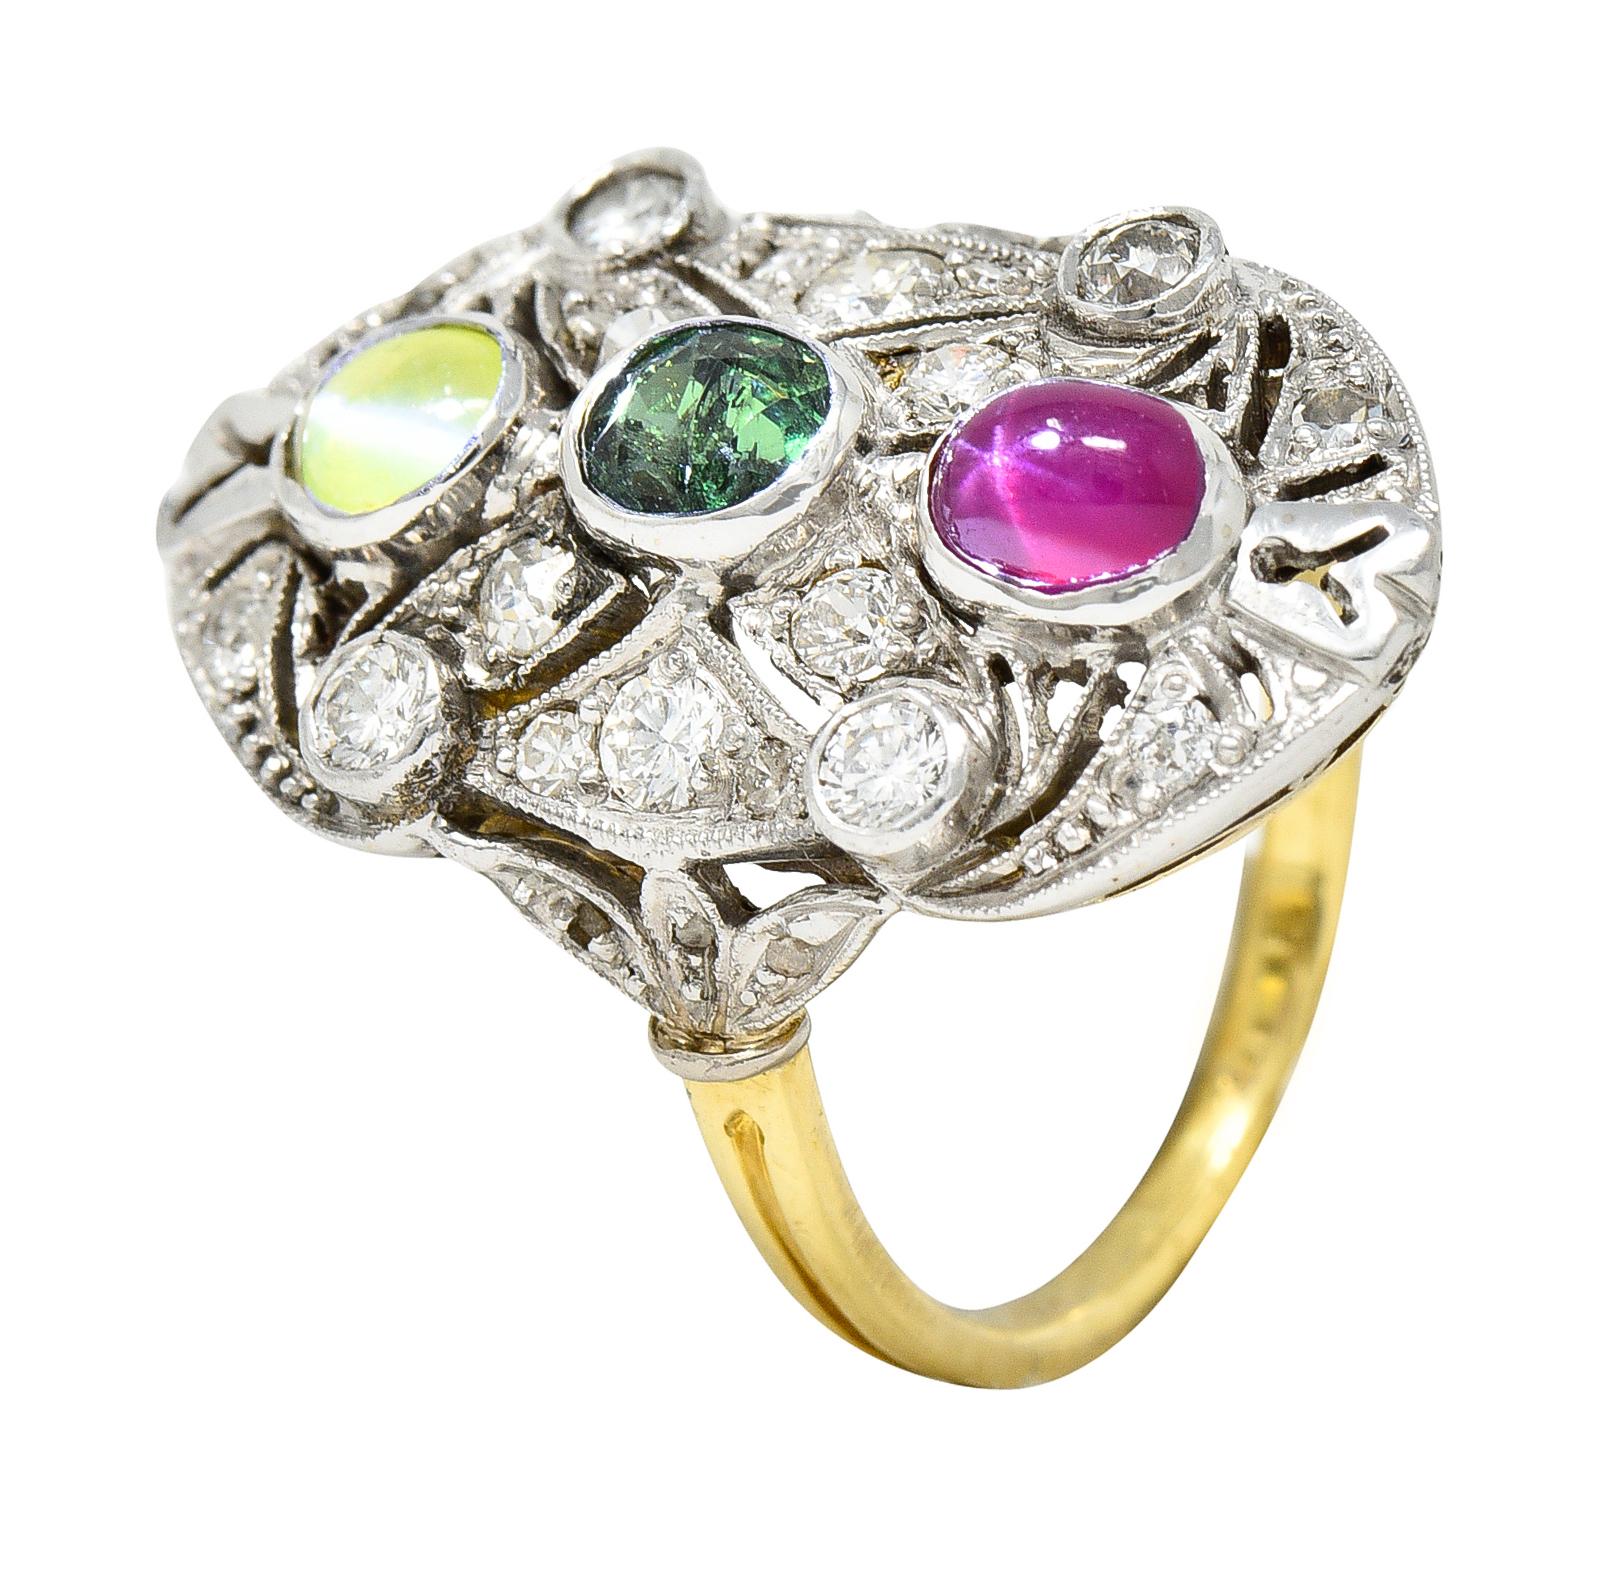 Dinner ring is oriented North to South and depicts a stylized X motif. Centering an oval cut alexandrite weighing approximately 0.42 carat. Bluish green in color in fluorescent light with strong color-change to grayish purple/red color in